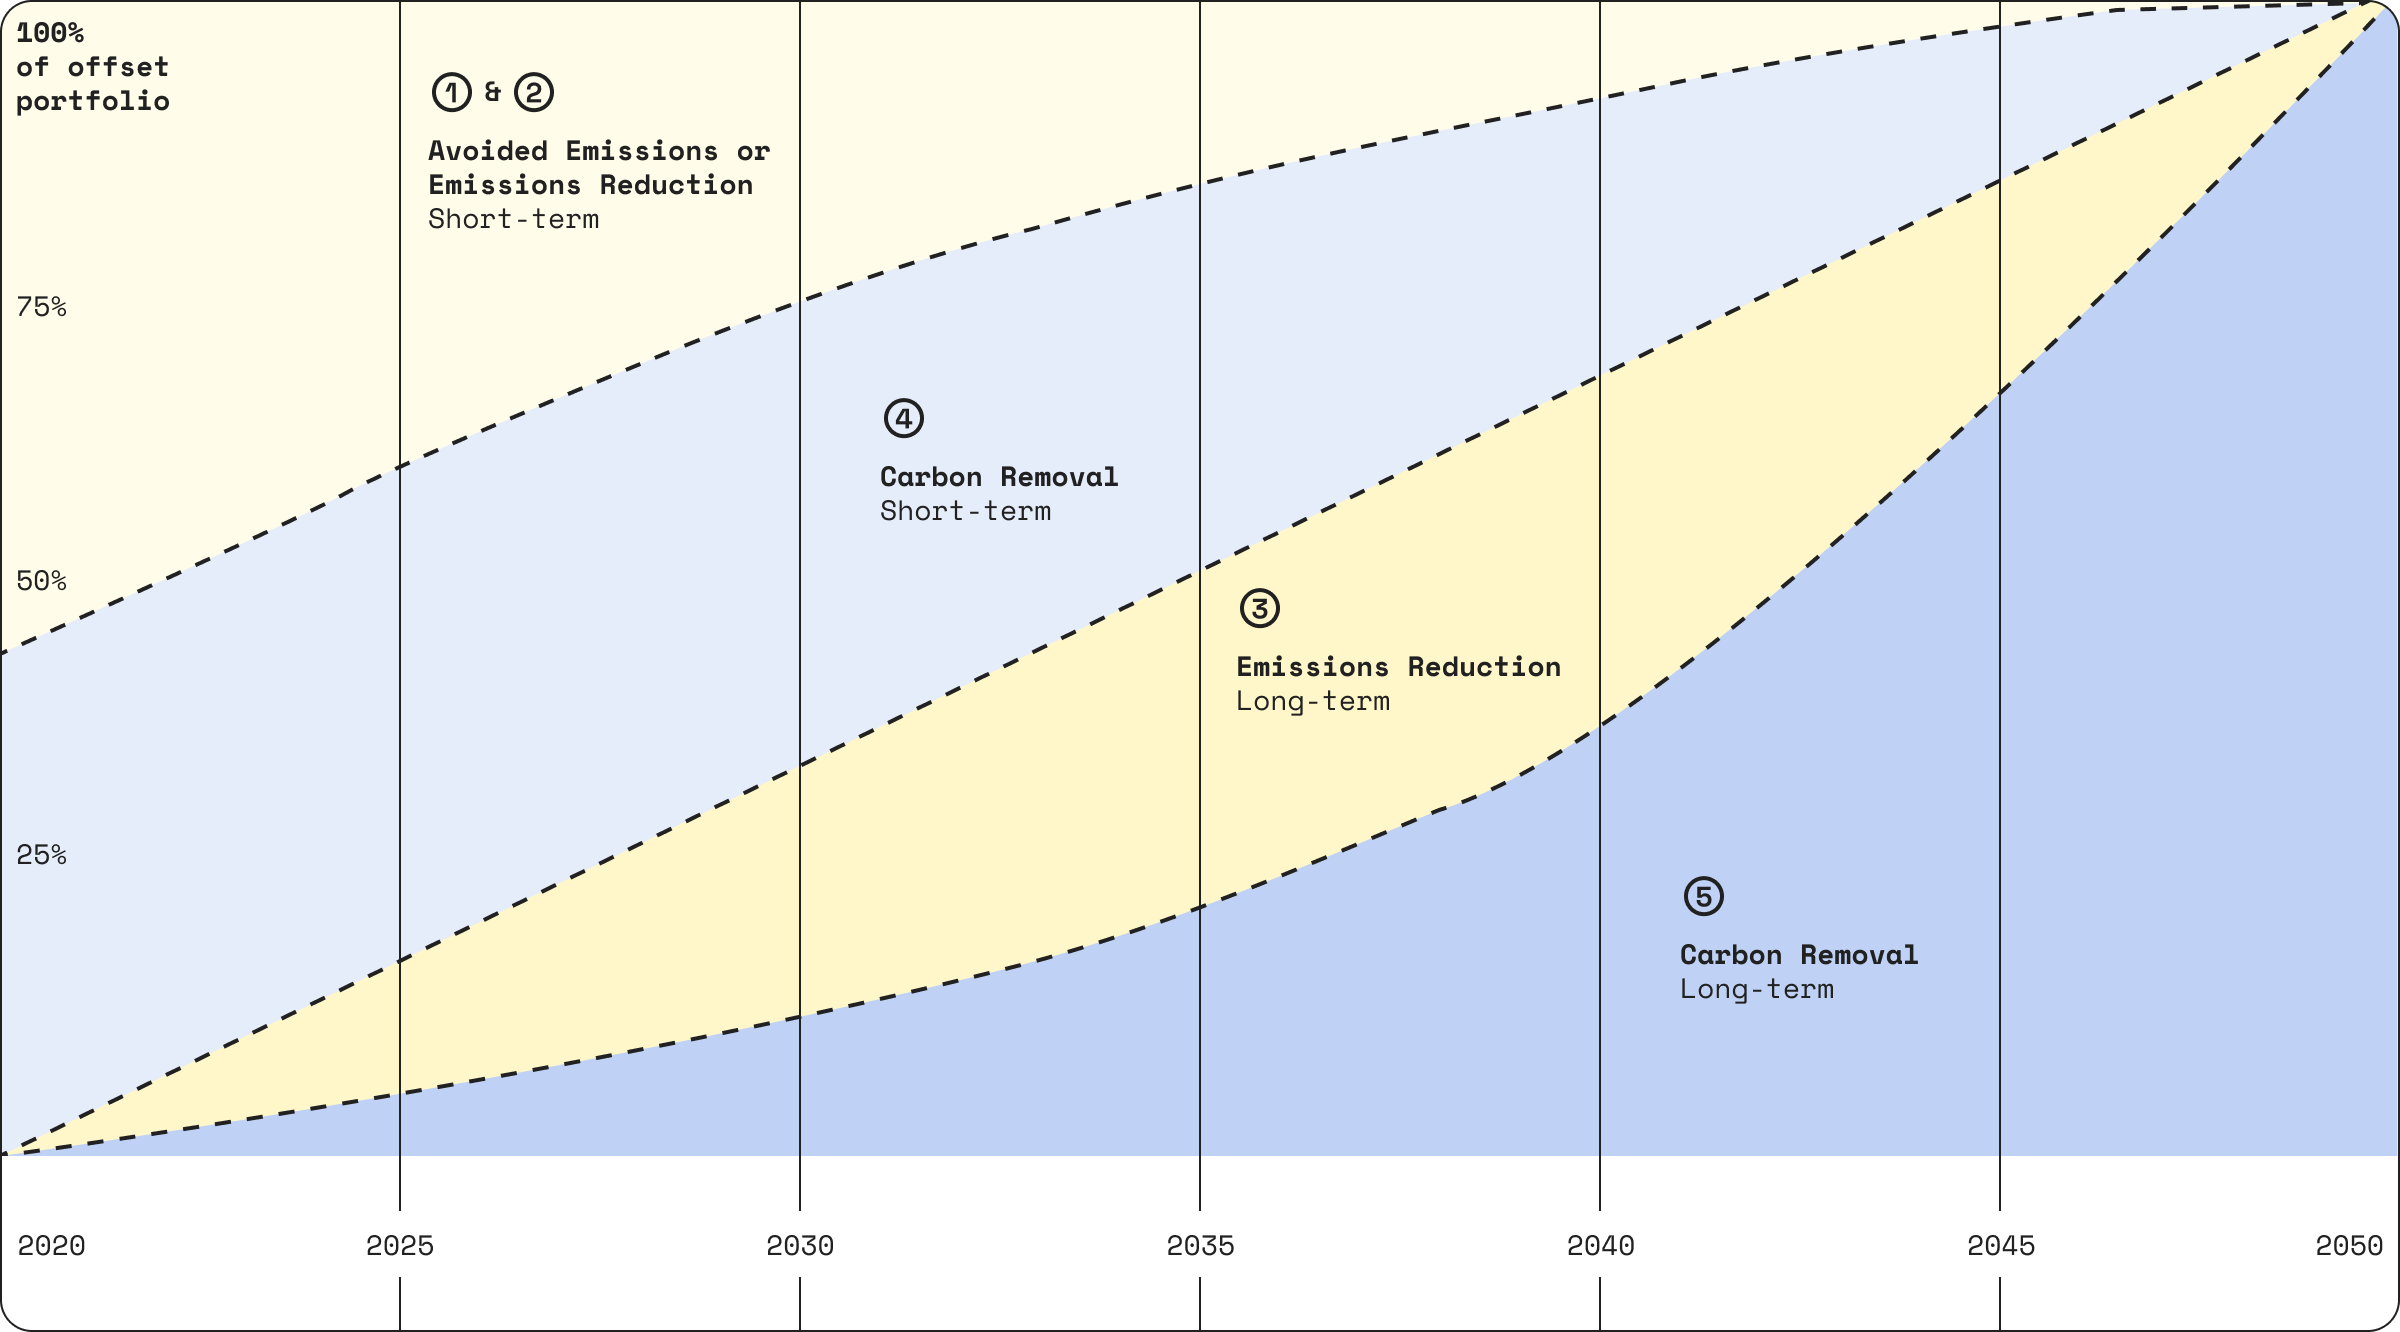 Graph from Oxford Offsetting Principles, p. 9, showing an ideal offsetting portfolio over time